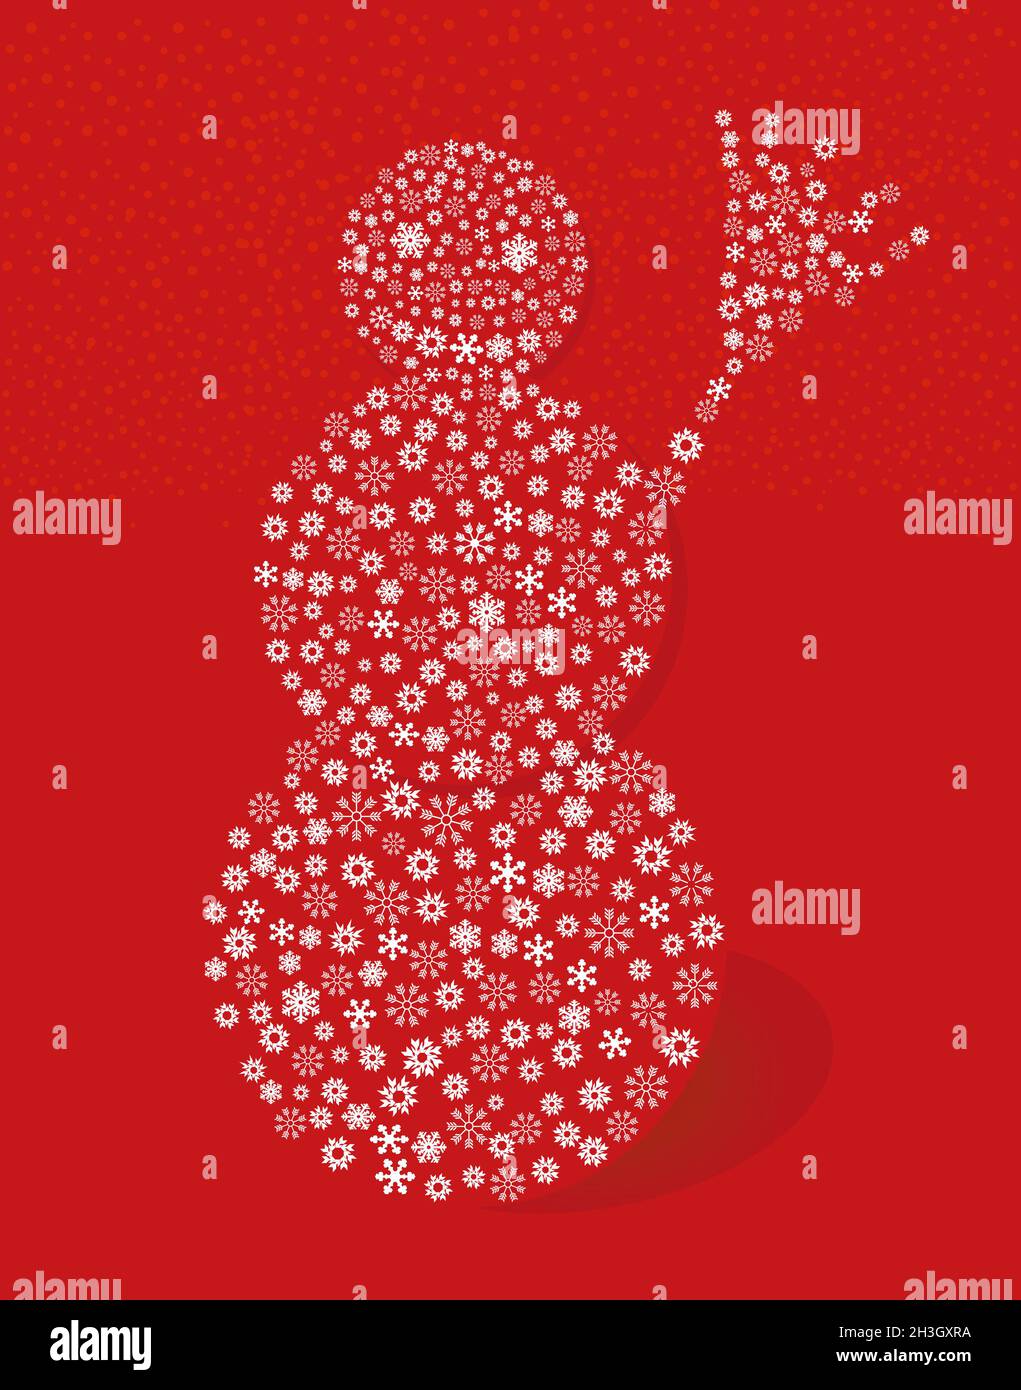 Snowman on red Stock Photo